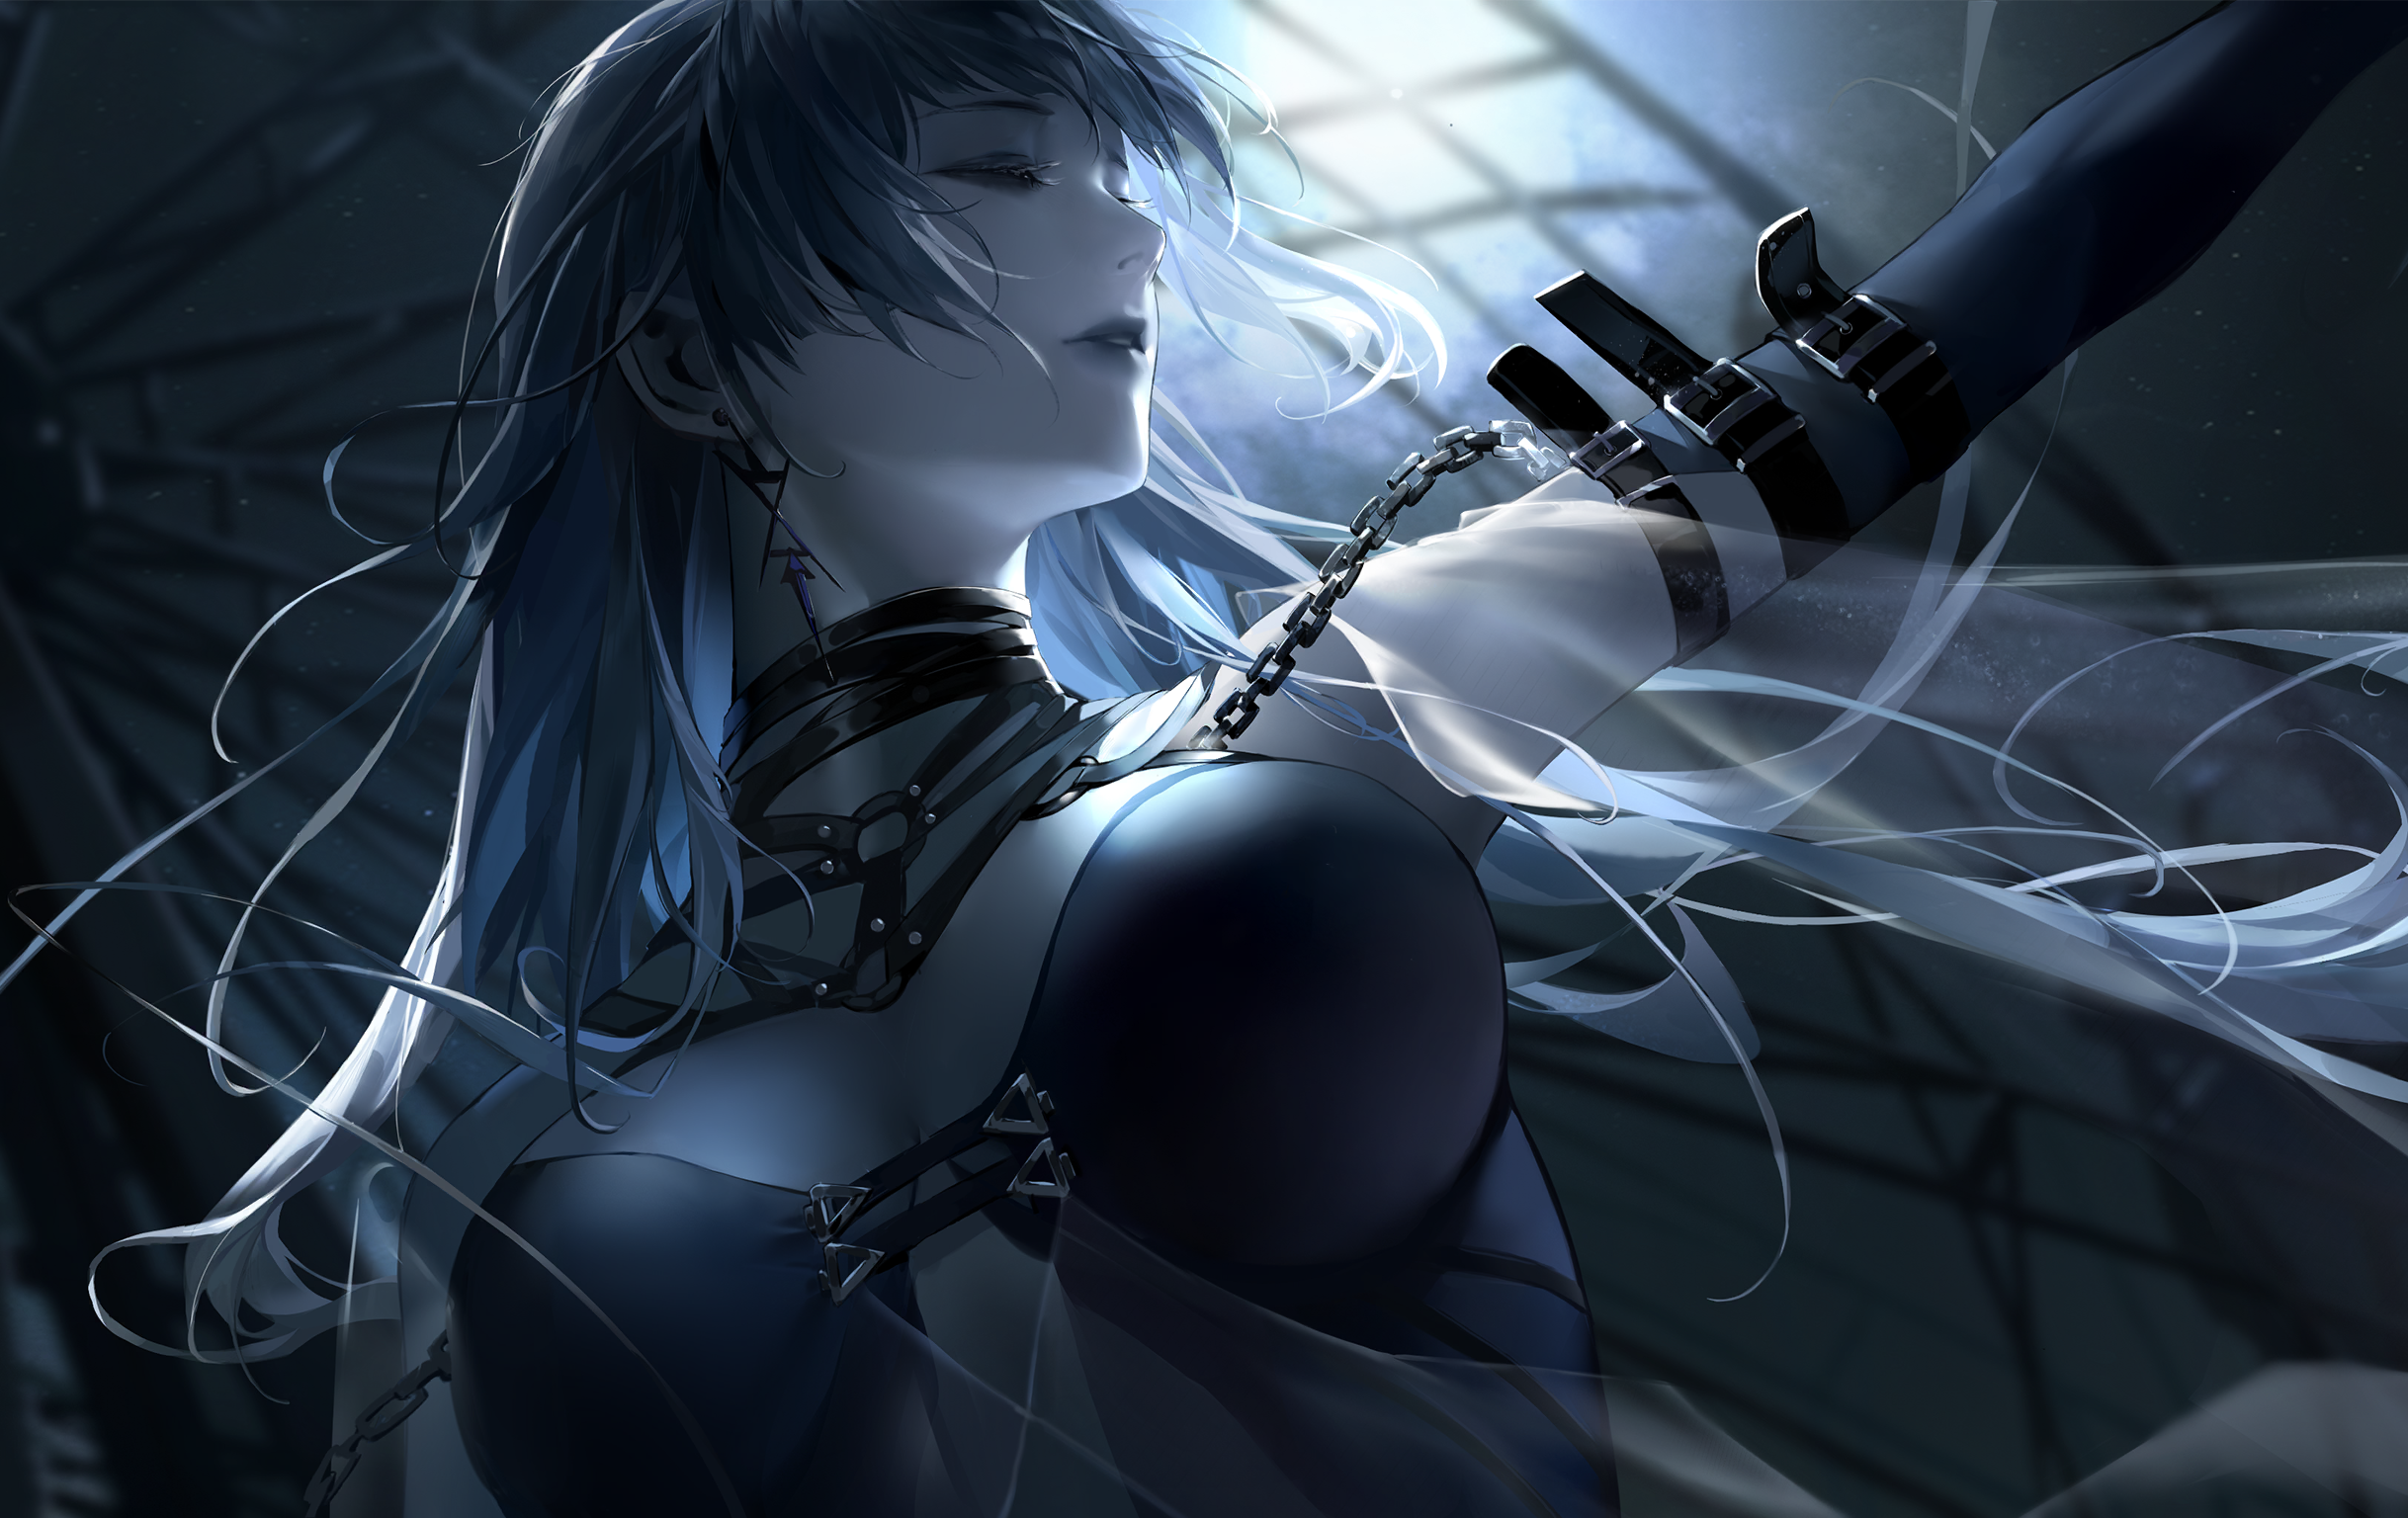 MBCC Hamel Path To Nowhere Anime Girls Closed Eyes Chains Wallpaper -  Resolution:2436x1536 - ID:1350789 